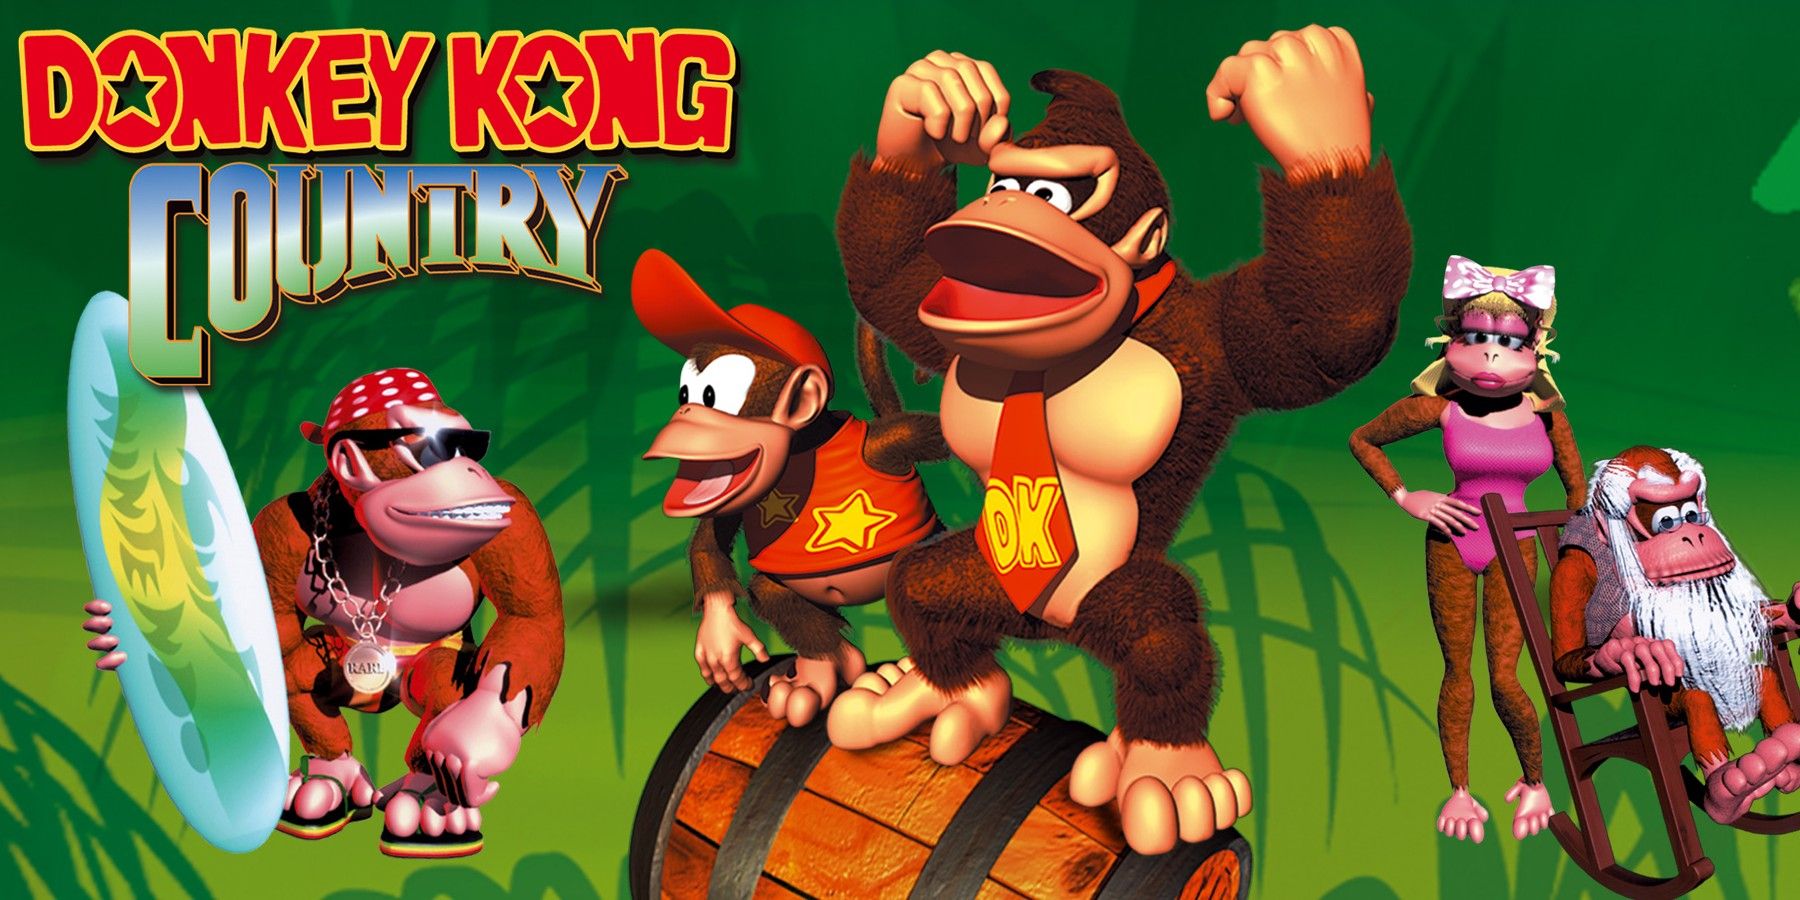 donkey-kong-country-characters-and-logo